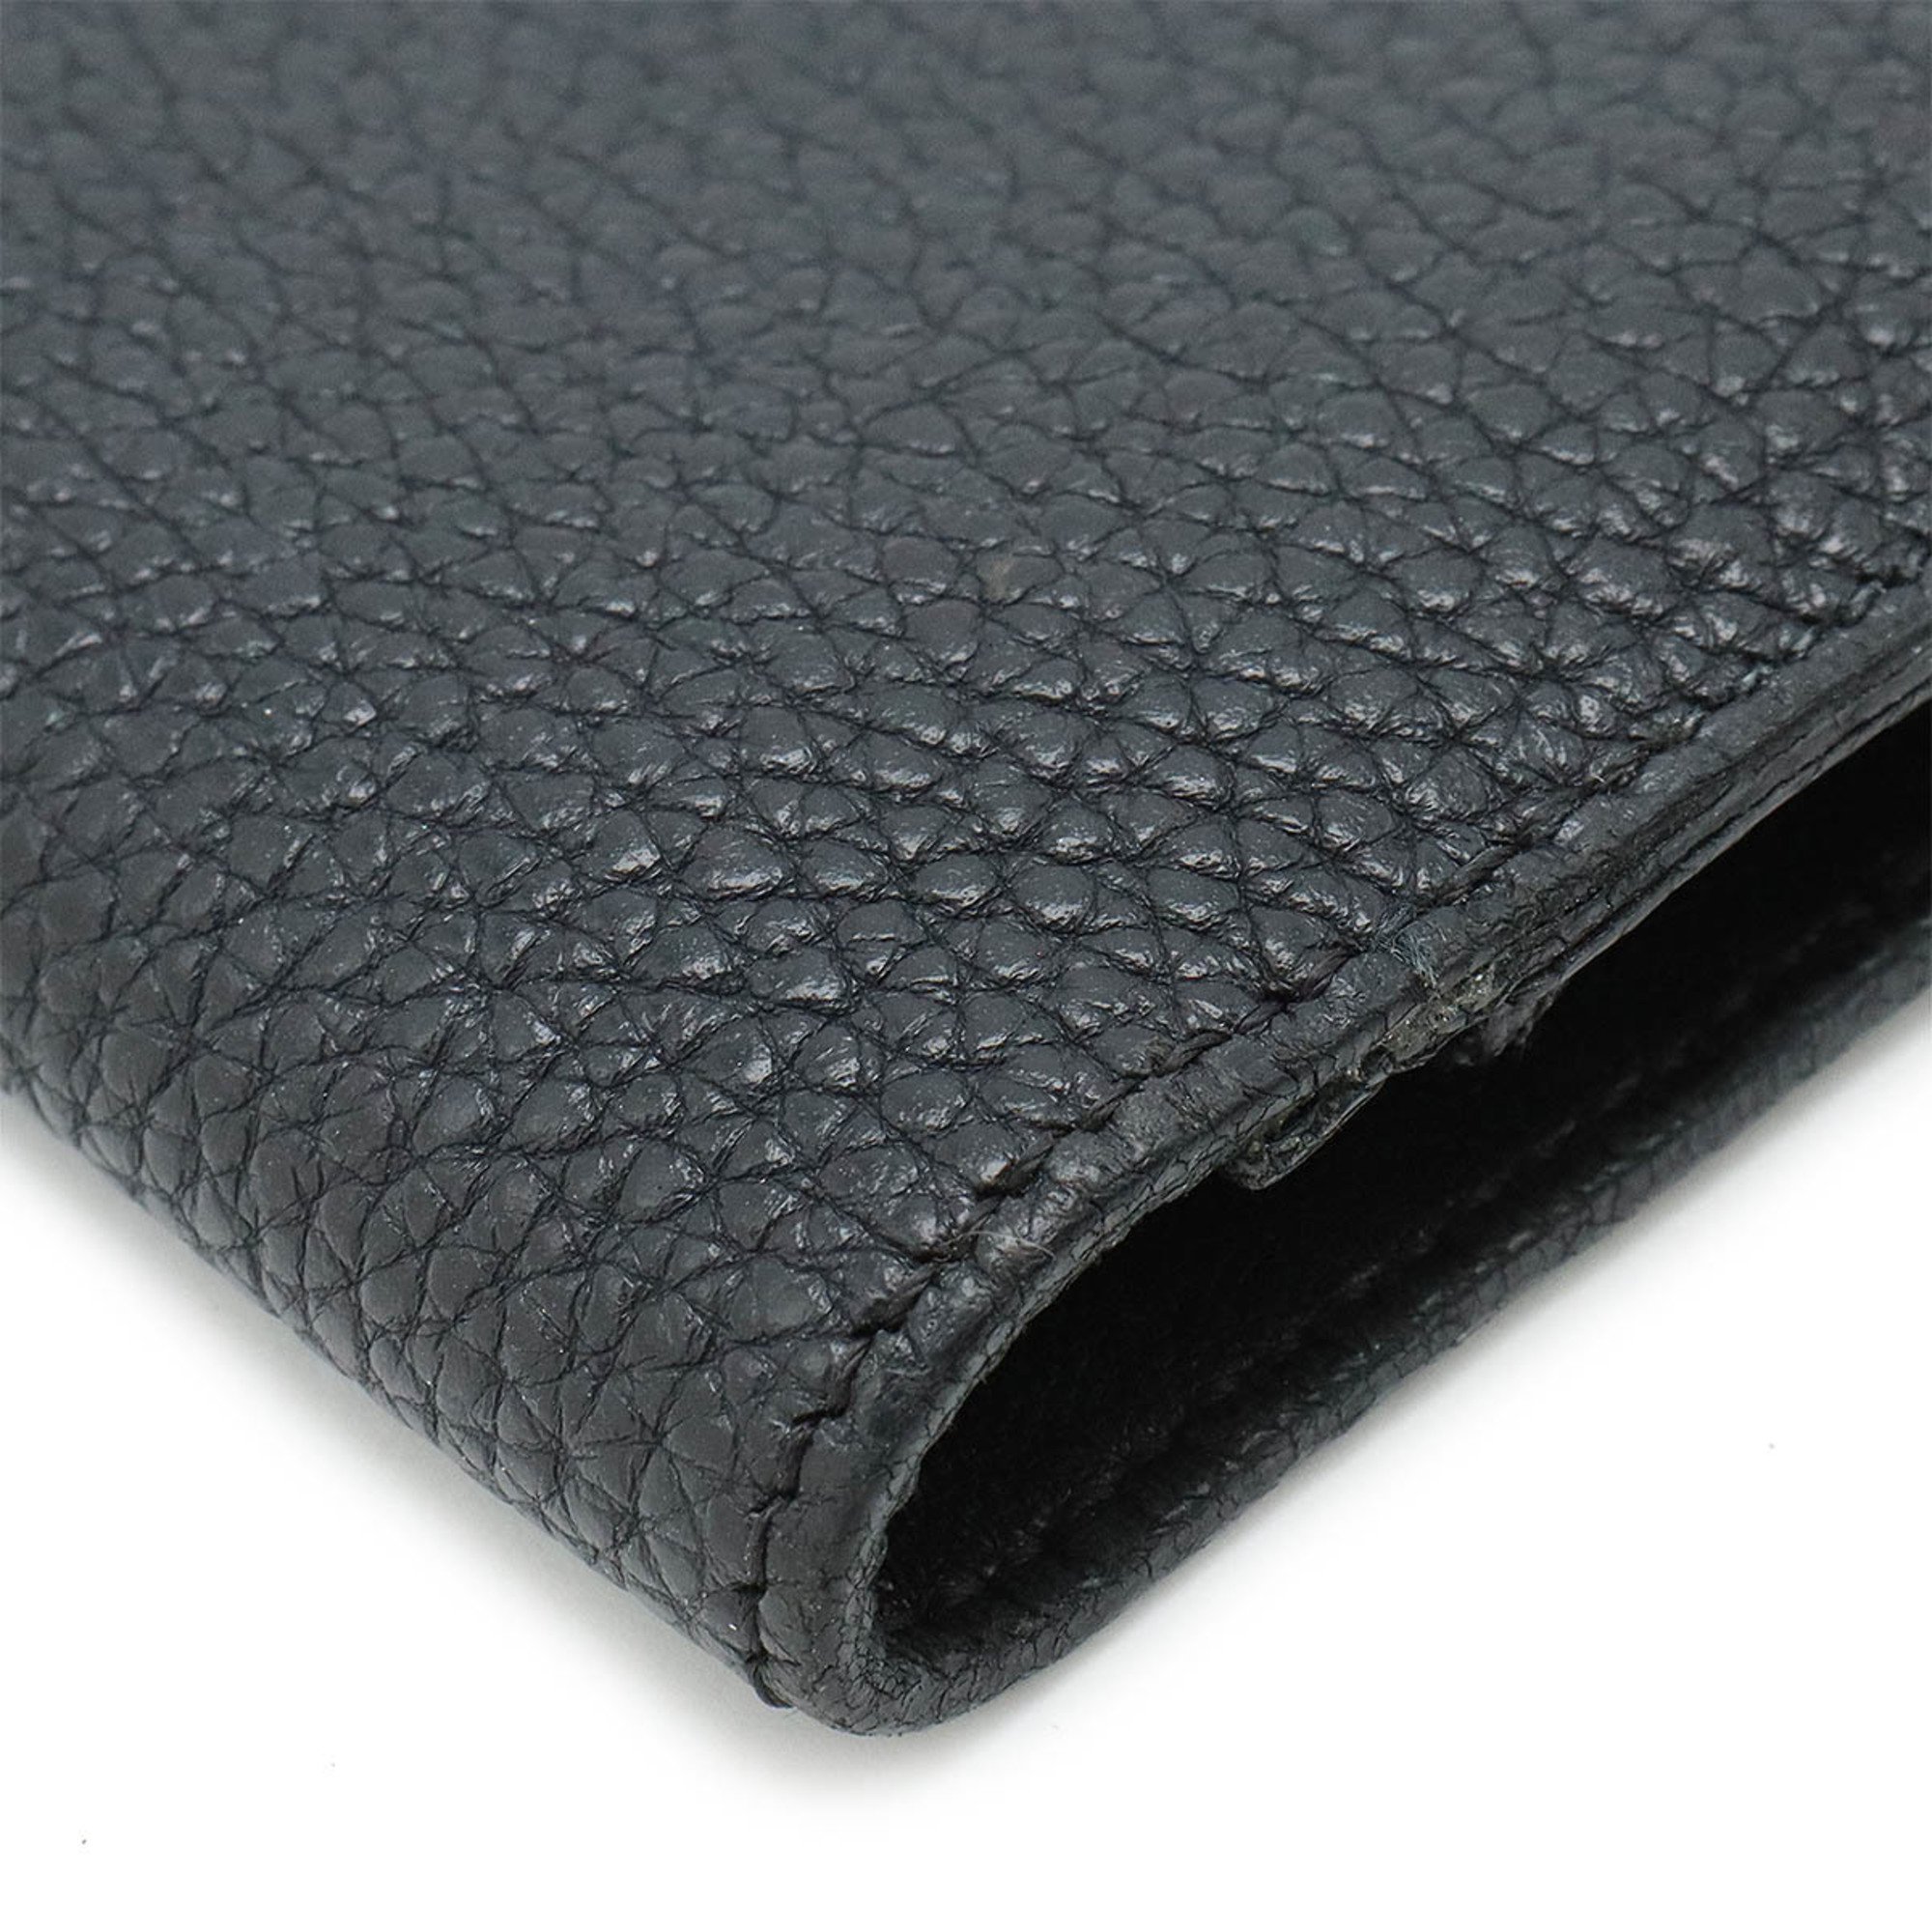 HERMES Dogon Duo GM Bi-fold long wallet Taurillon Clemence leather Black Coin